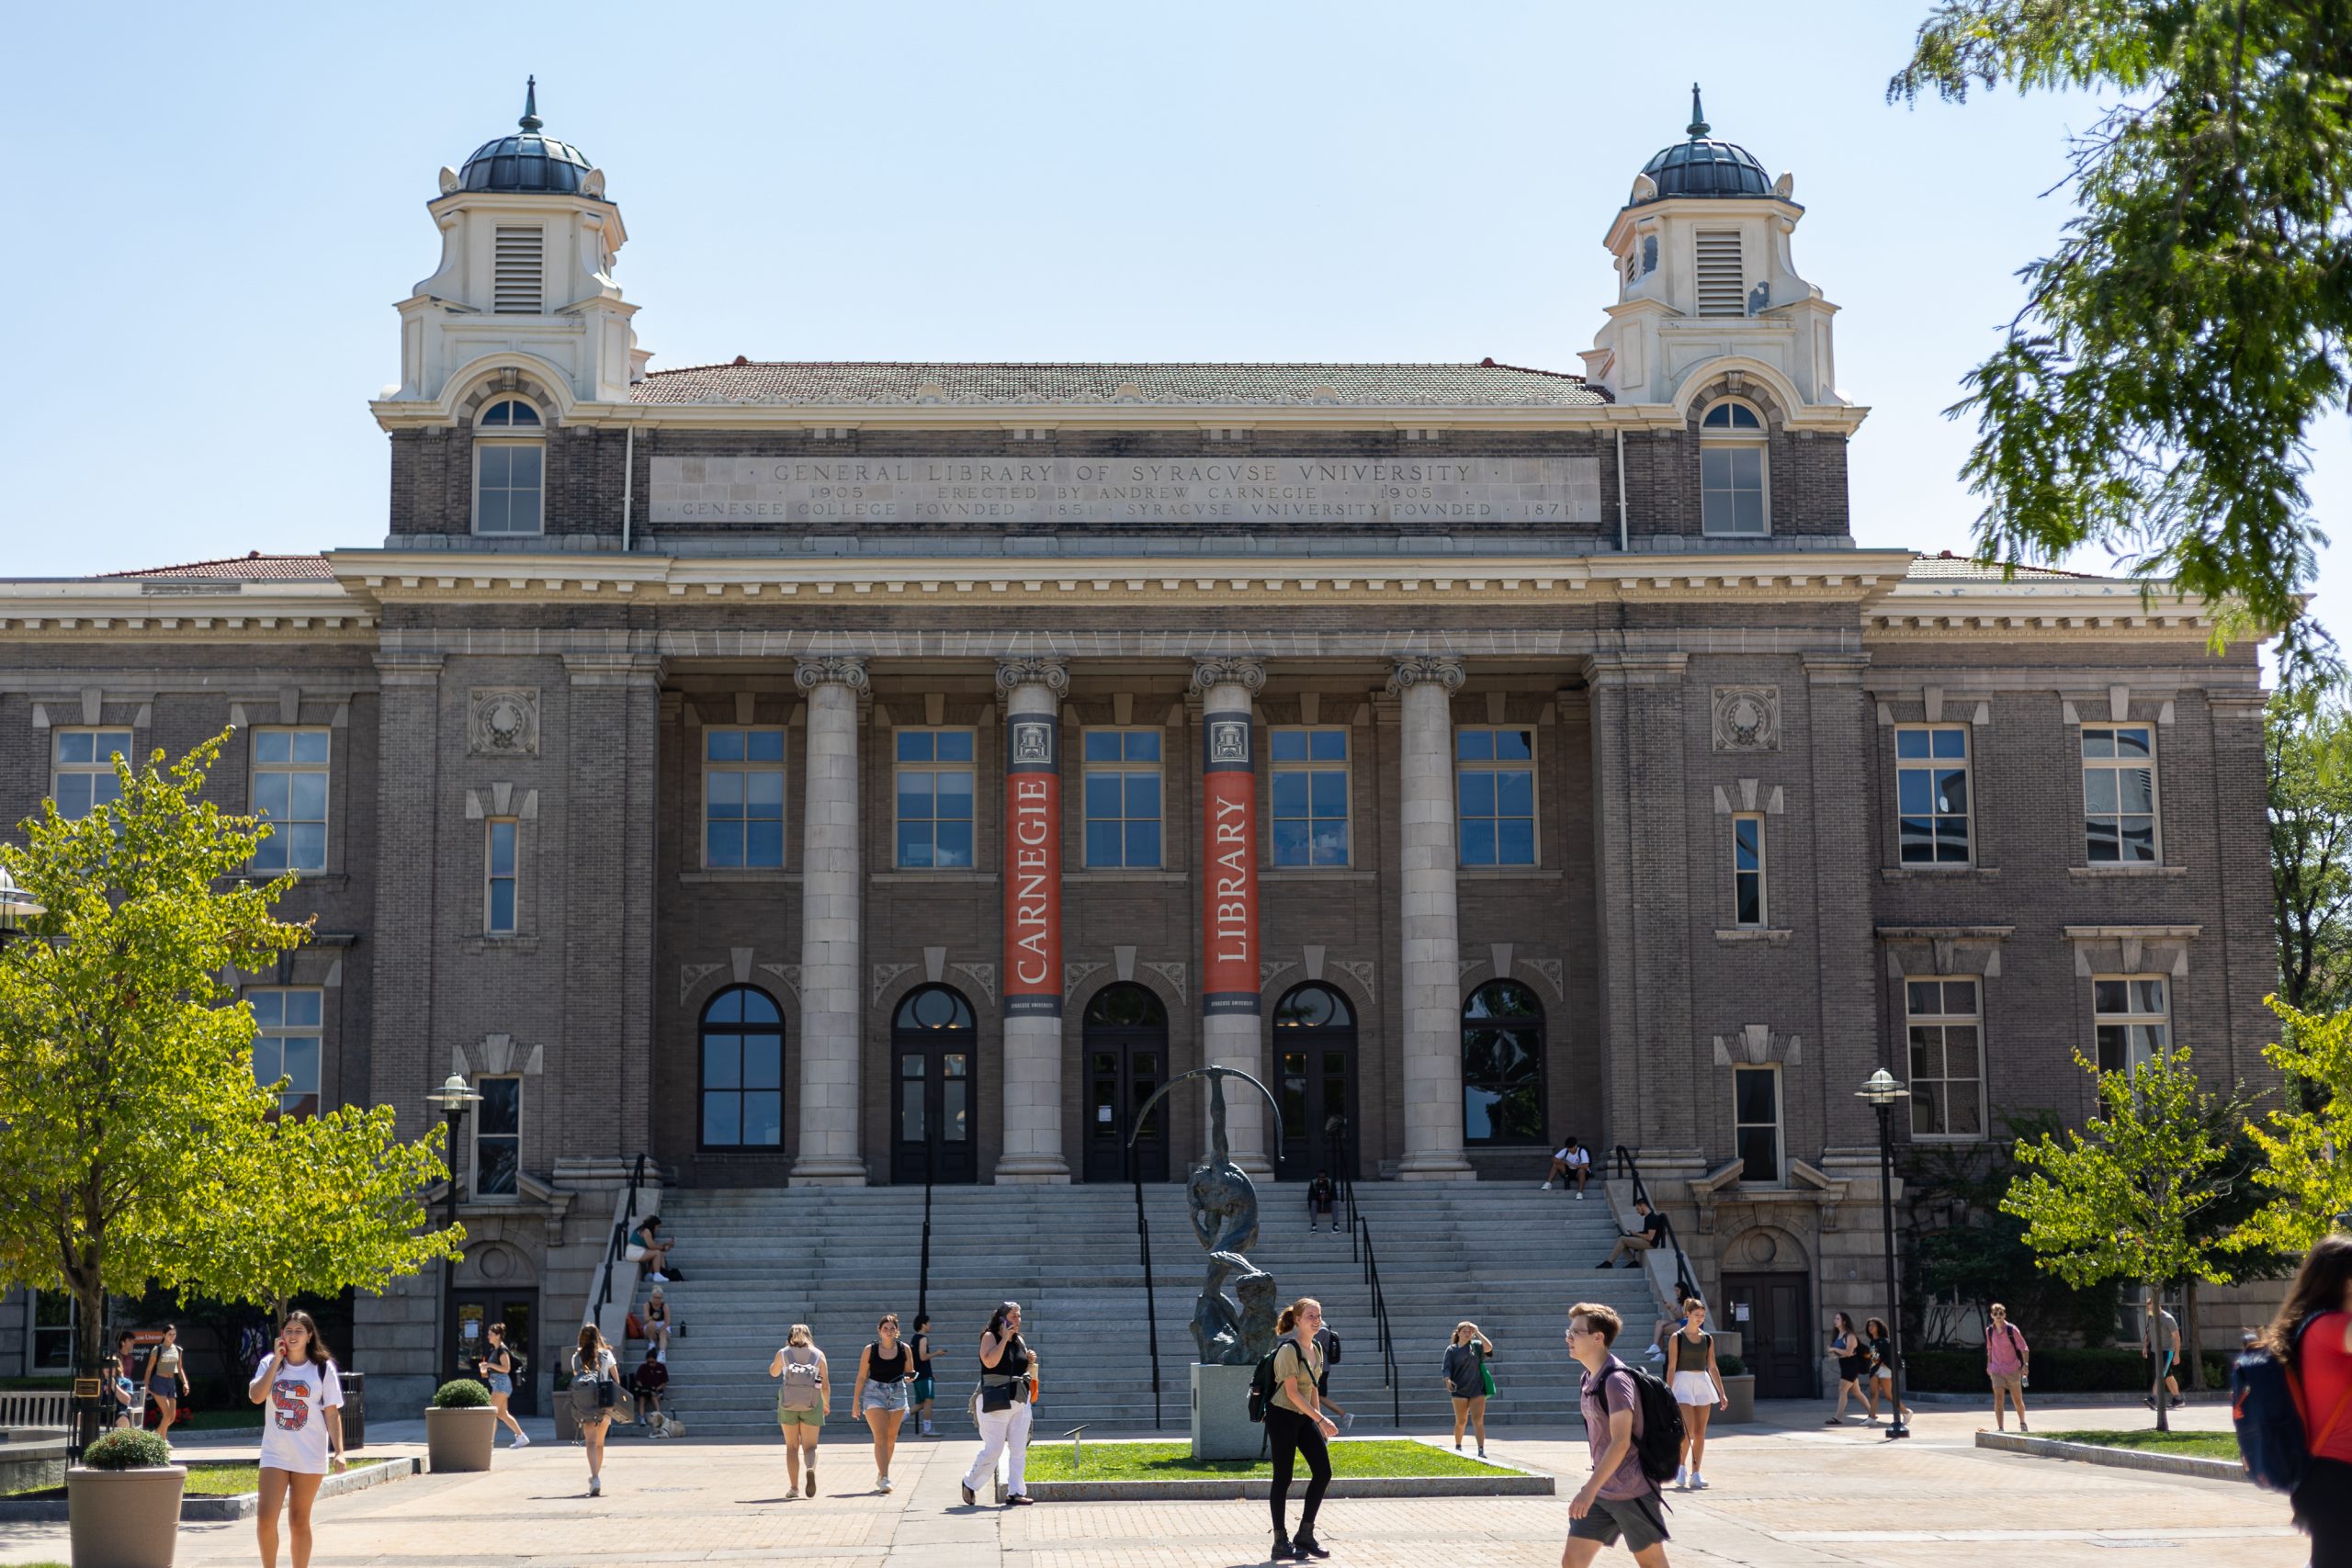 Students walk past Carnegie Library on their way to class on the first school day of the year on Monday, August 29th, 2022.